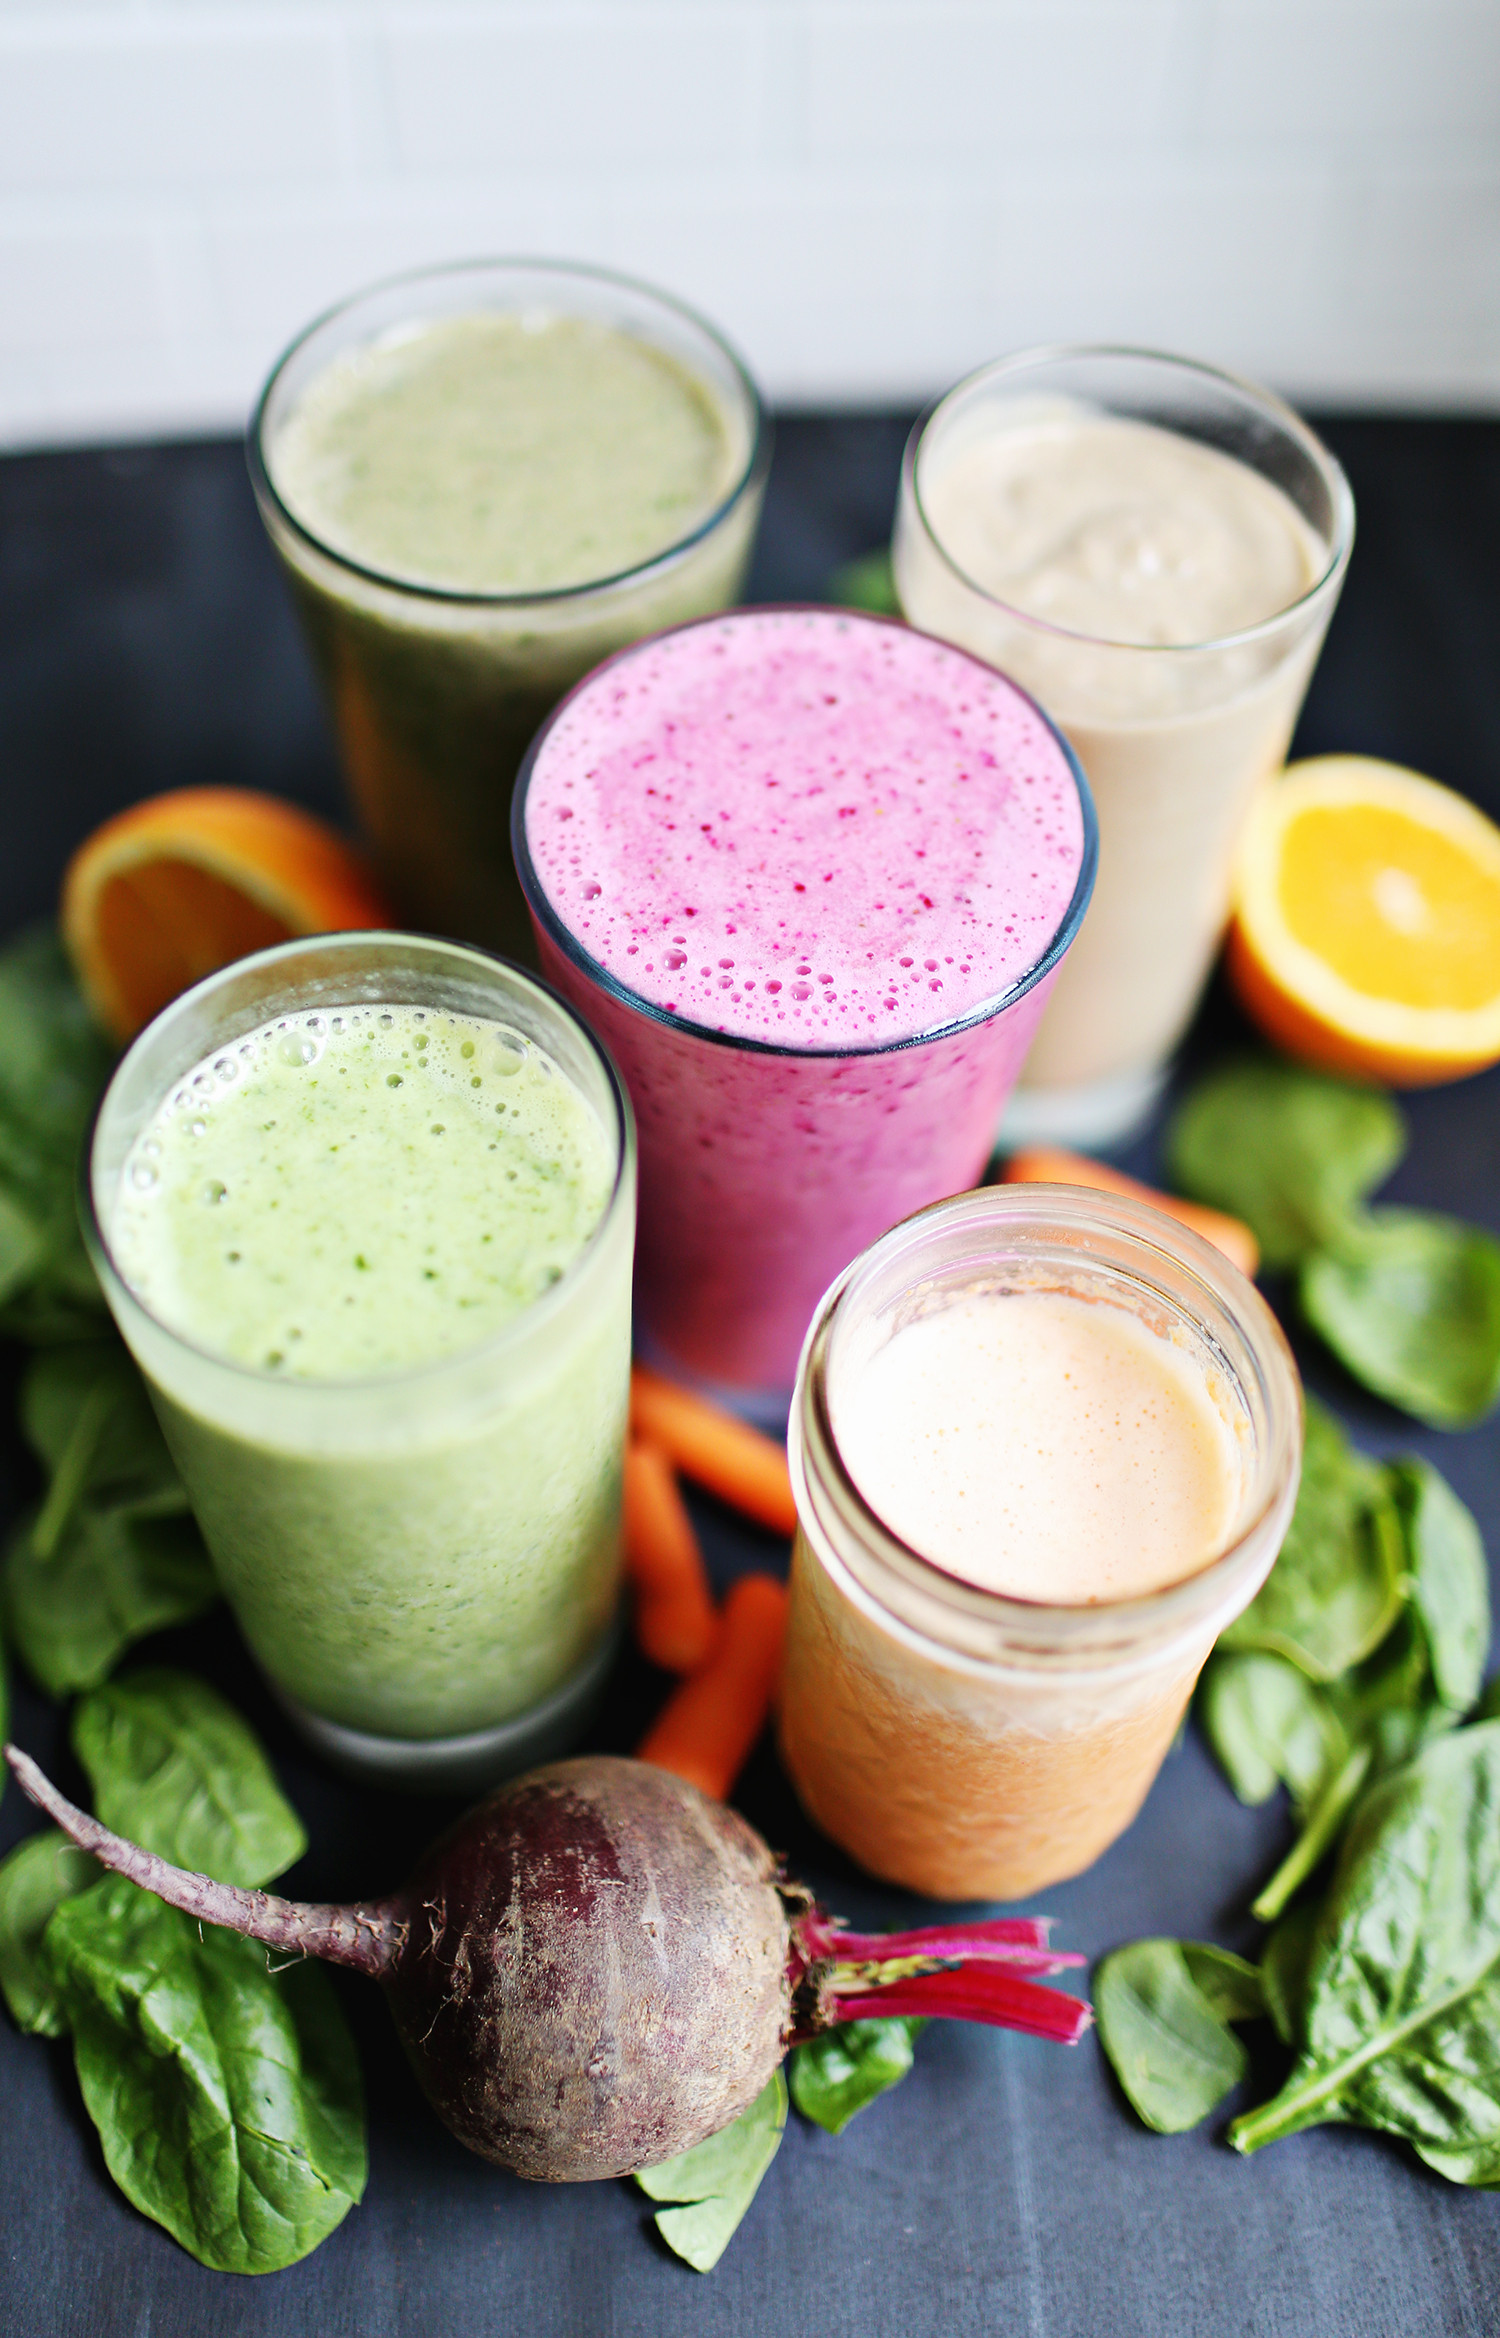 15  Ways How to Make the Best Healthy Smoothies for Breakfast You Ever Tasted